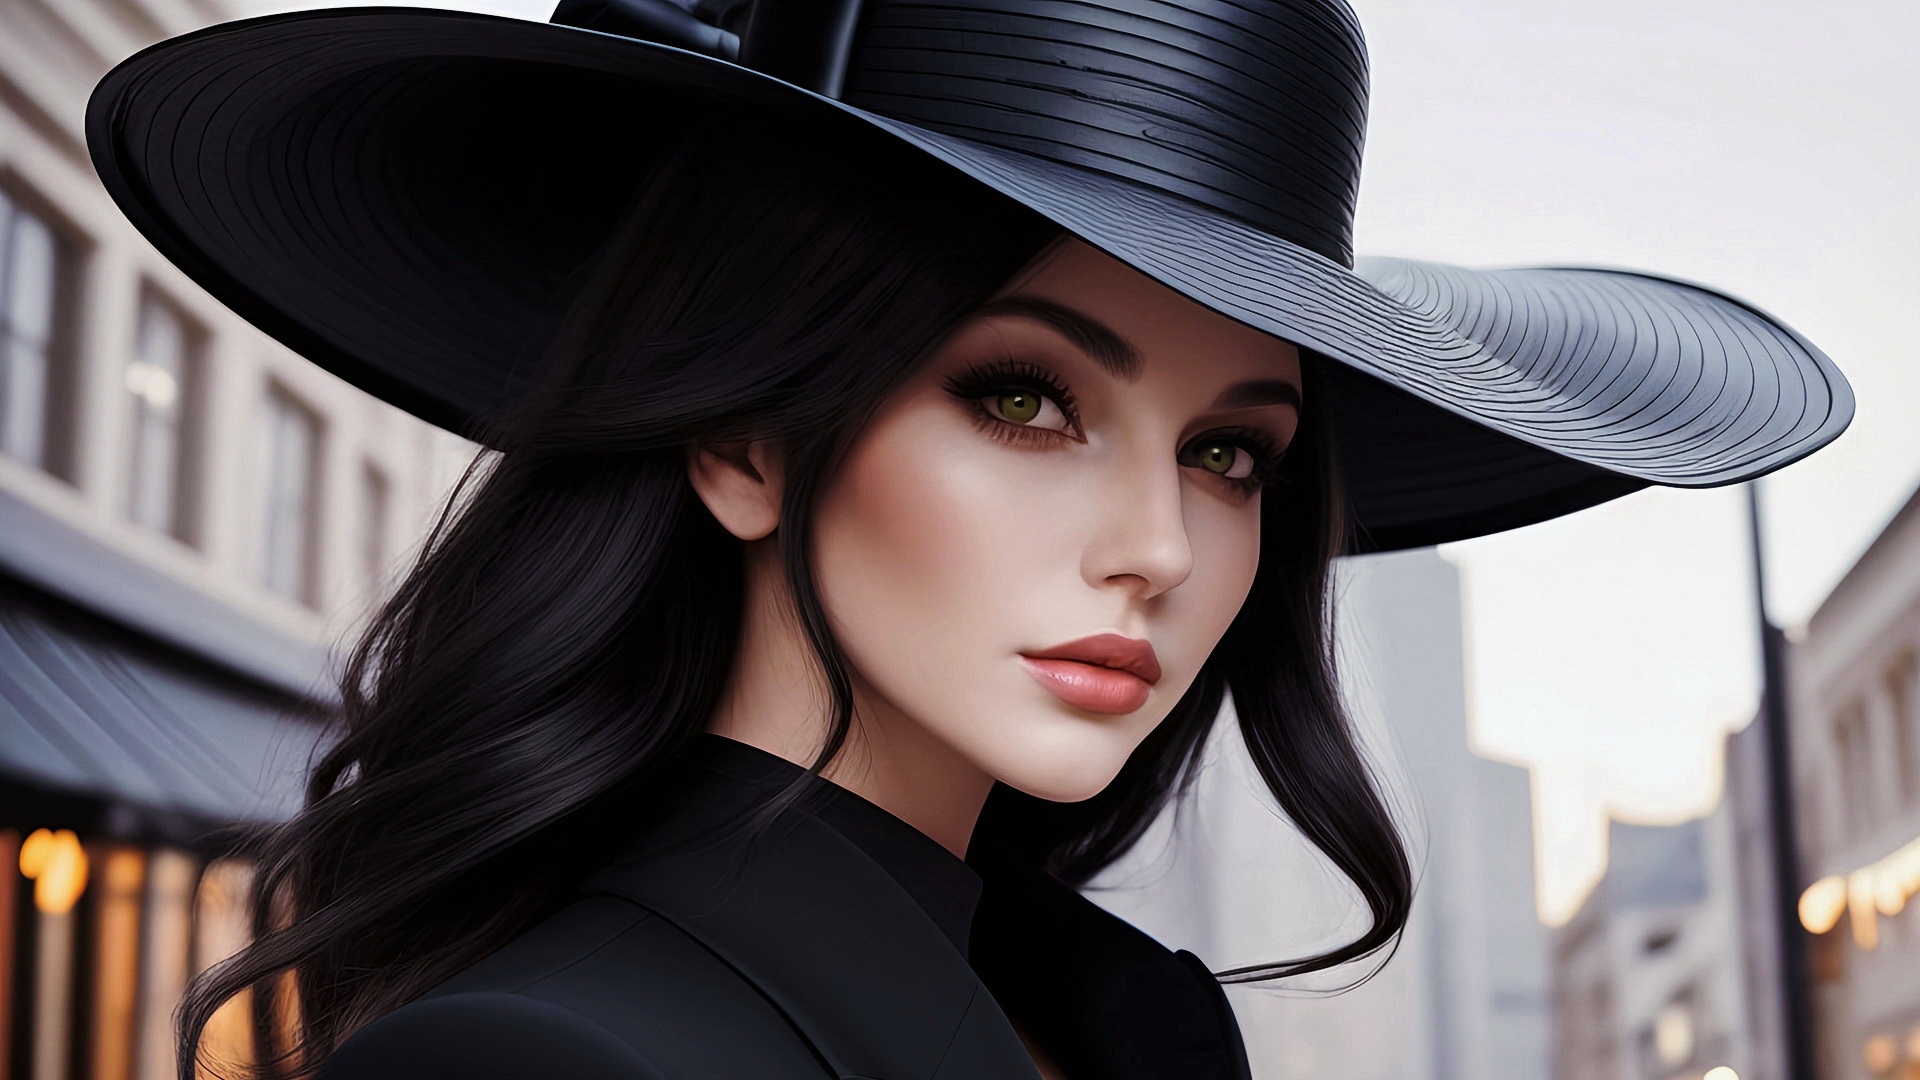 Free photo Portrait of a girl in a black hat on a city street